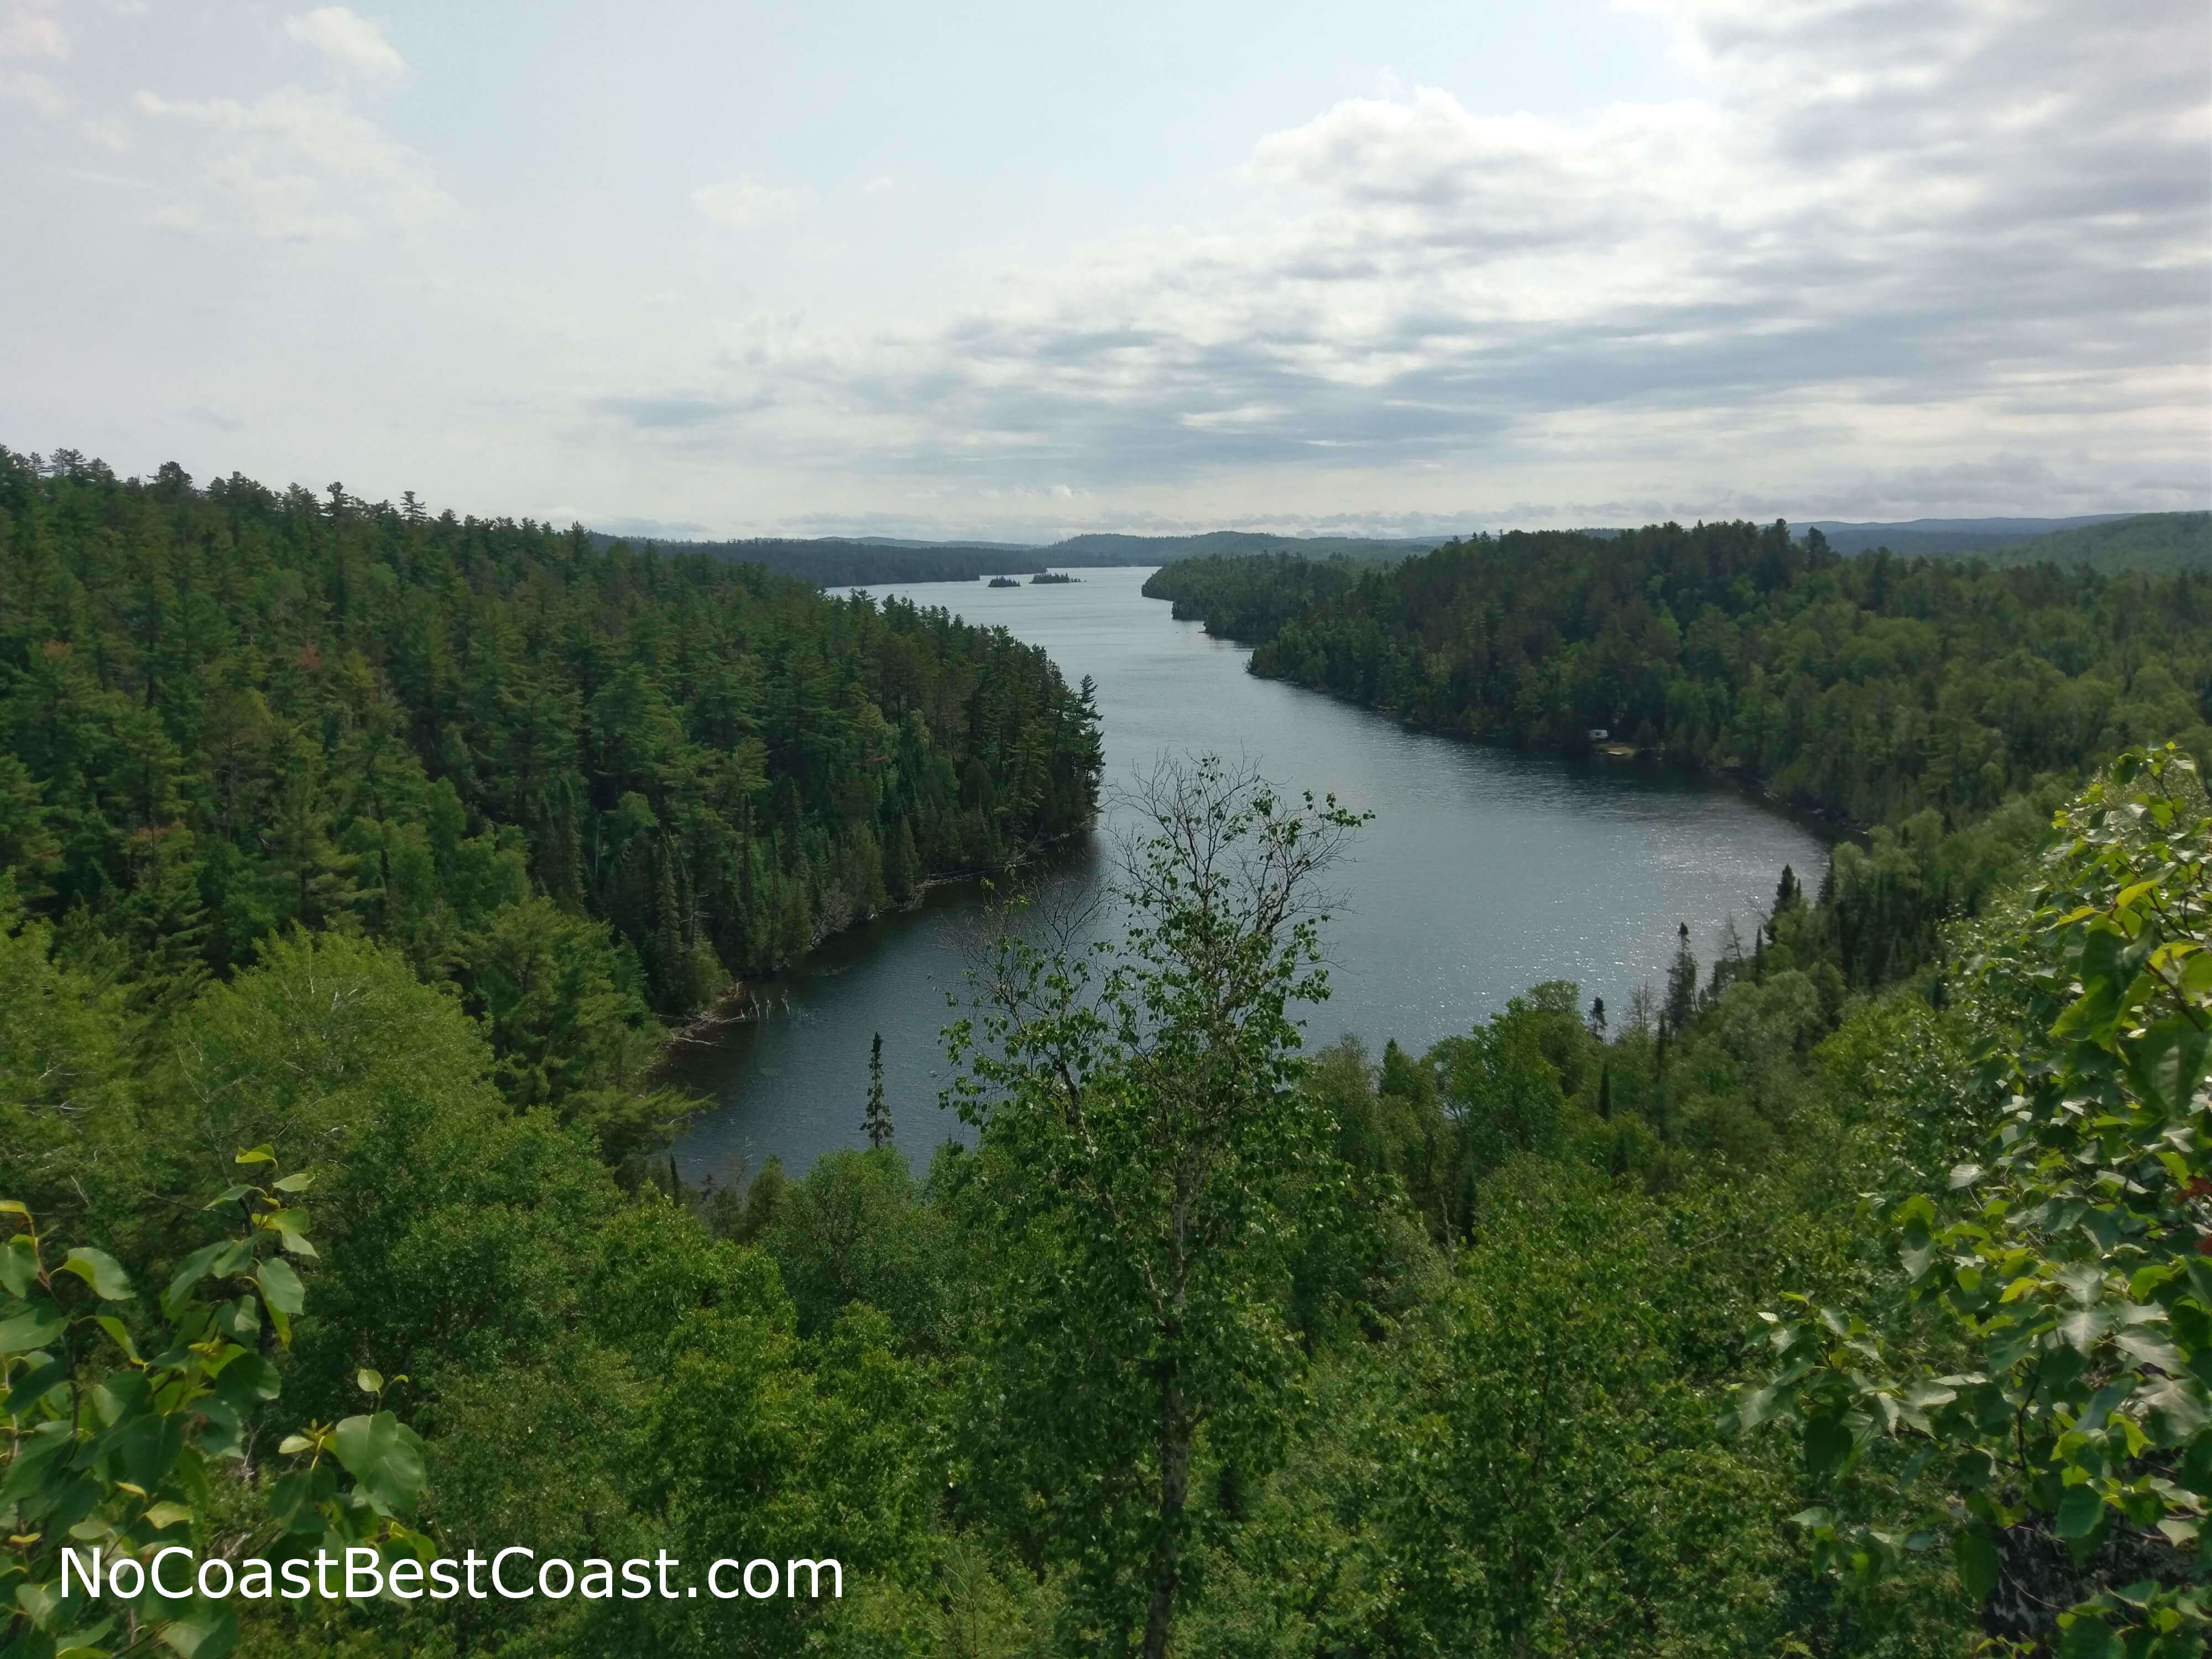 This hike is filled with overlooks of secluded lakes, like this view of West Bearskin Lake